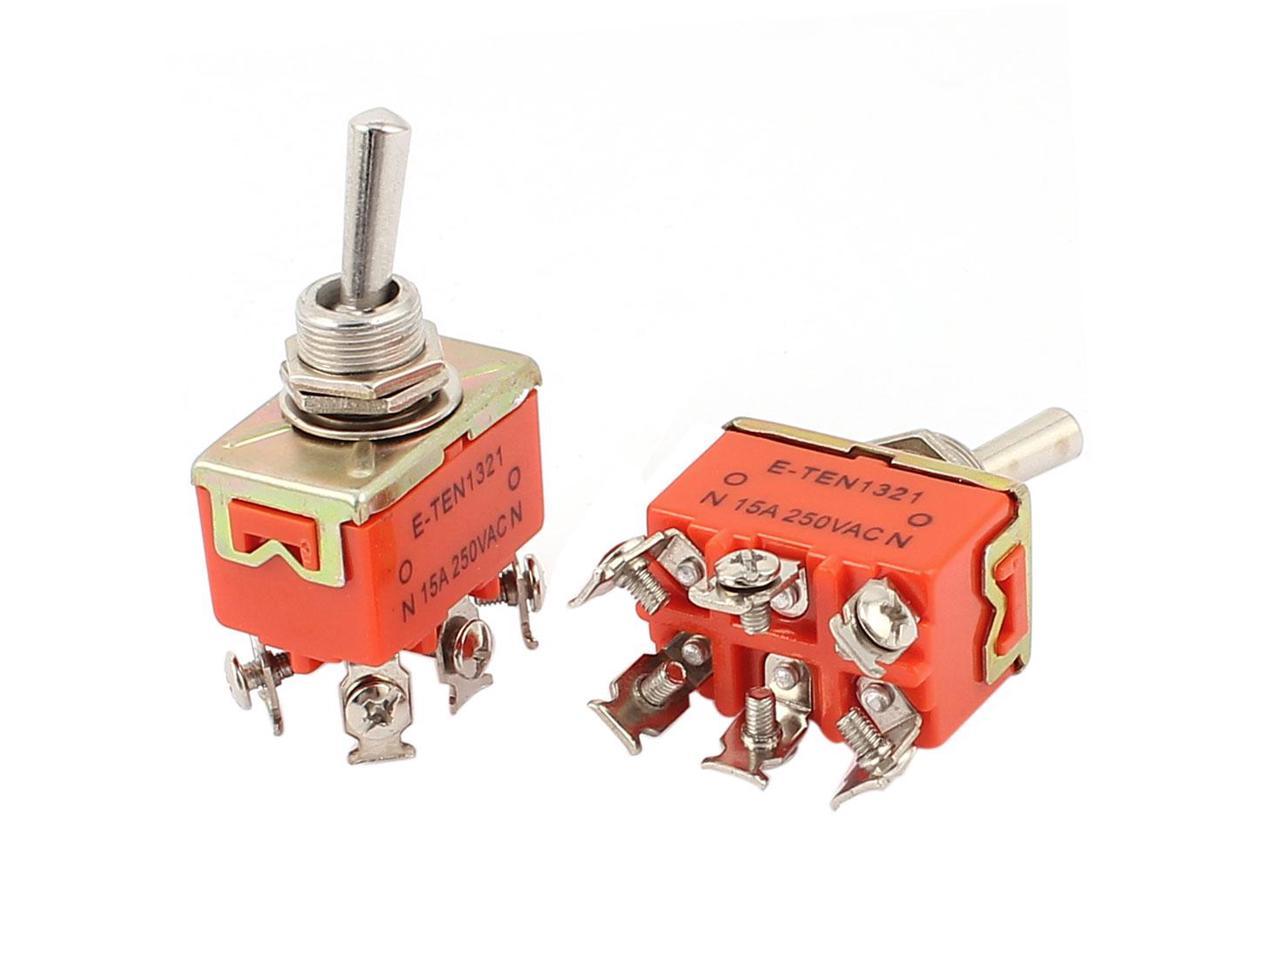 Spare Parts AC 250V 15A ON/ON 2 Positions 6 Pin Toggle Switch E-TEN1321 2pcs 